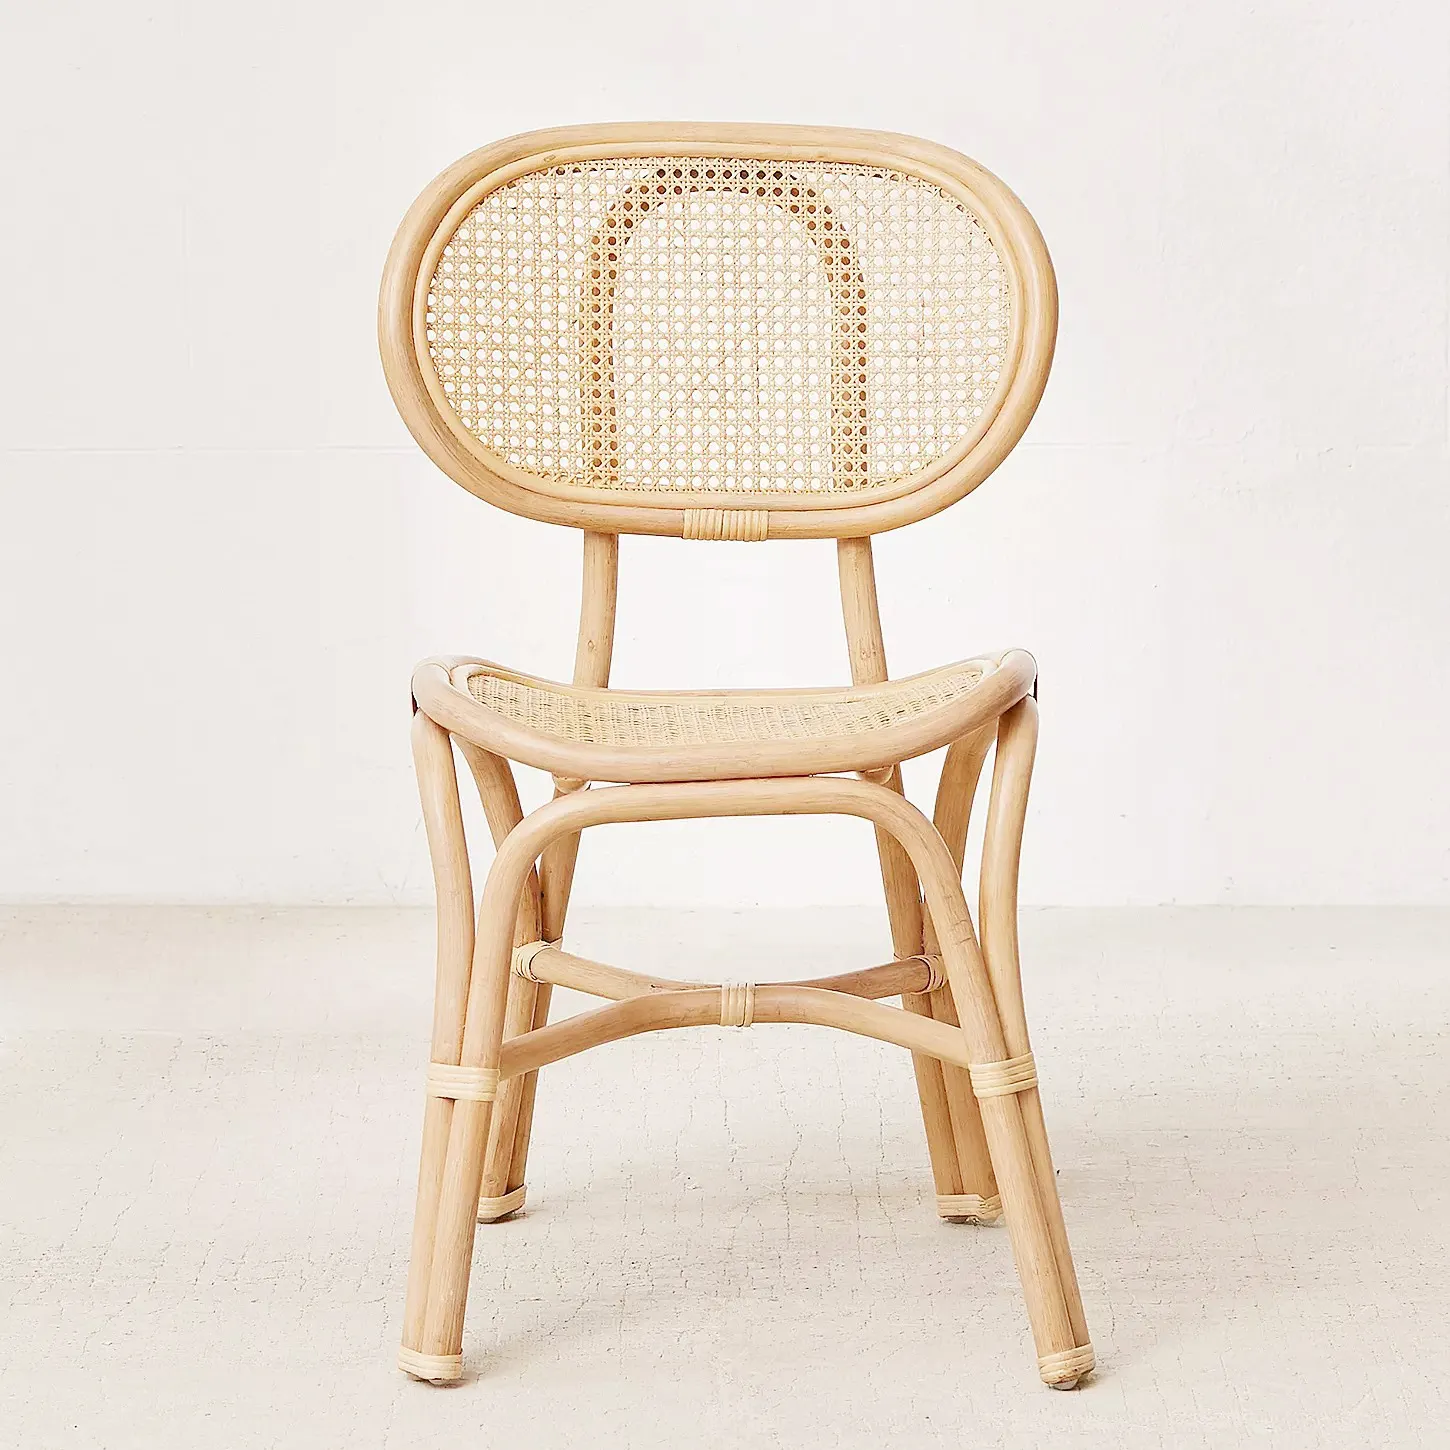 Unique design woven rattan cane chair bamboo dining commercial sturdy chairs made in Vietnam